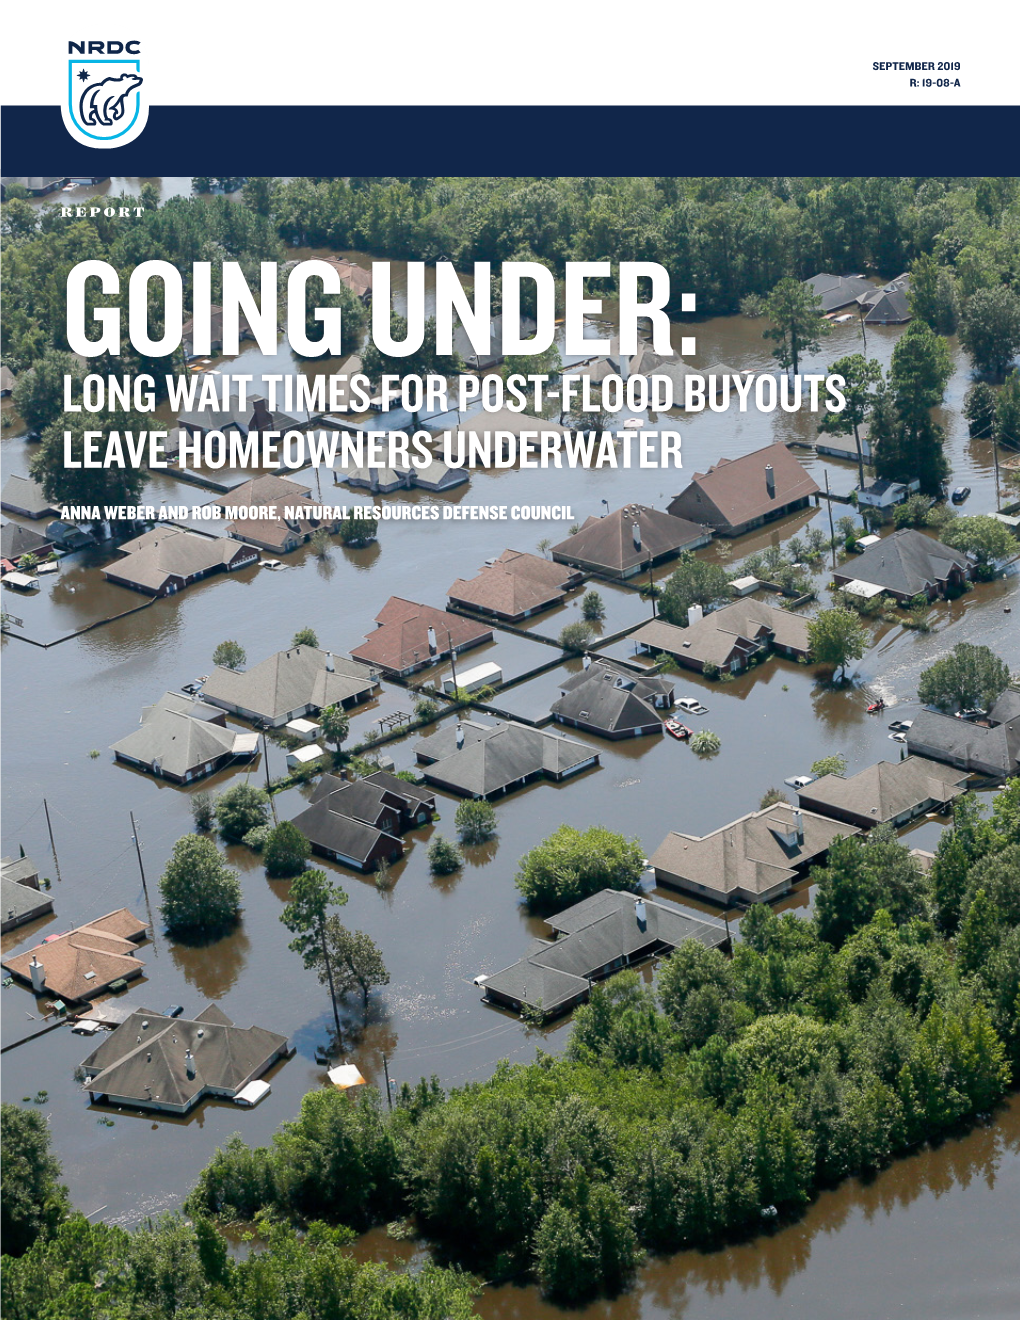 Going Under: Long Wait Times for Post-Flood Buyouts Leave Homeowners Underwater